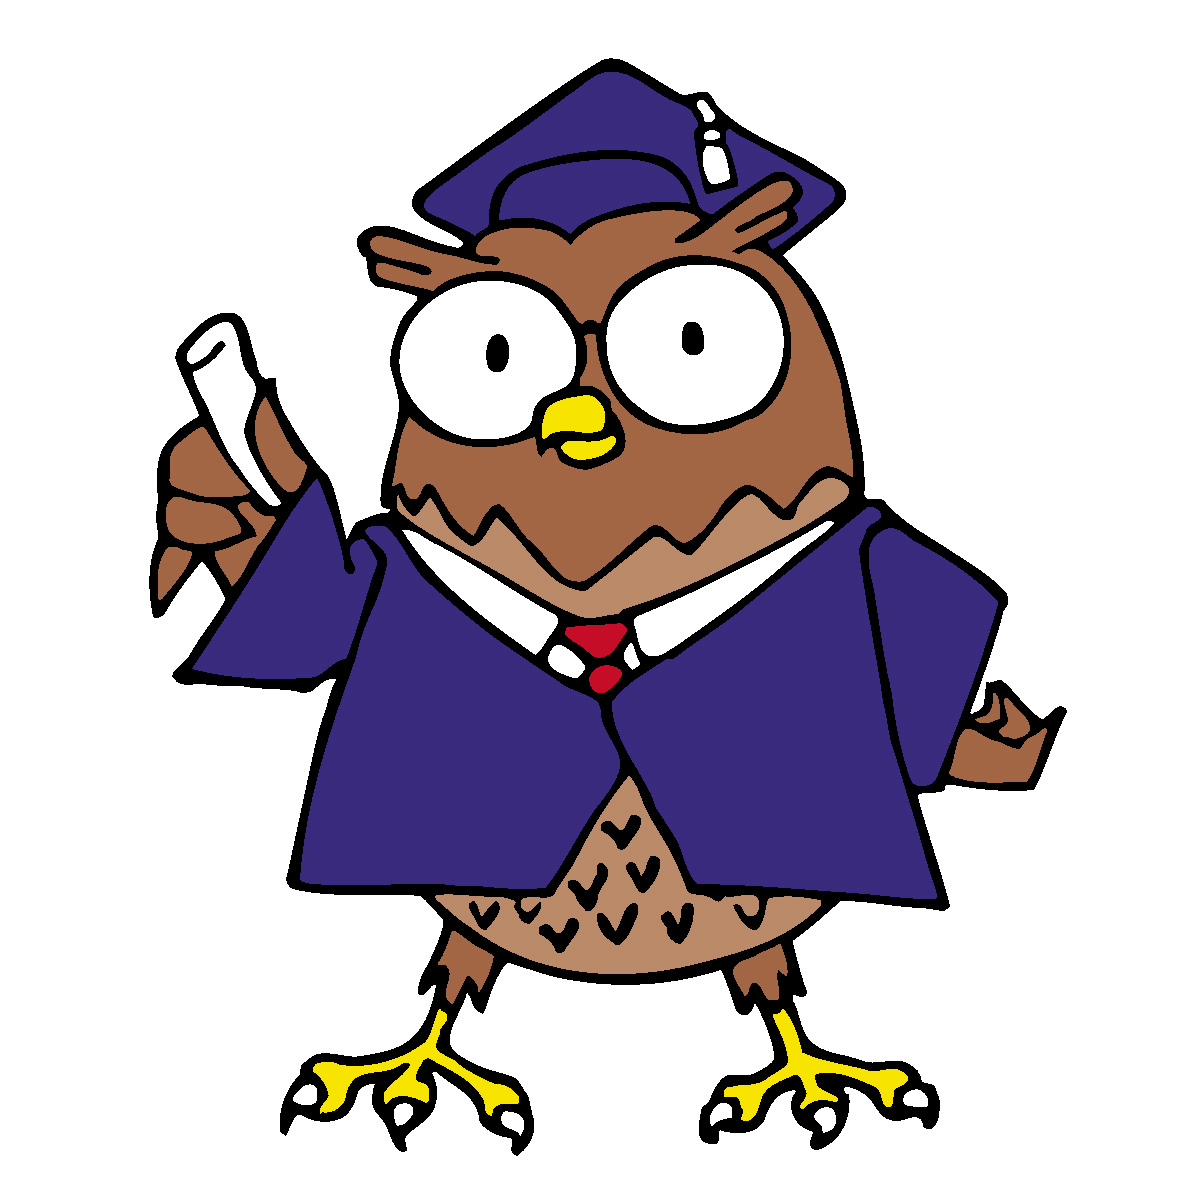 Free School Animated Clipart